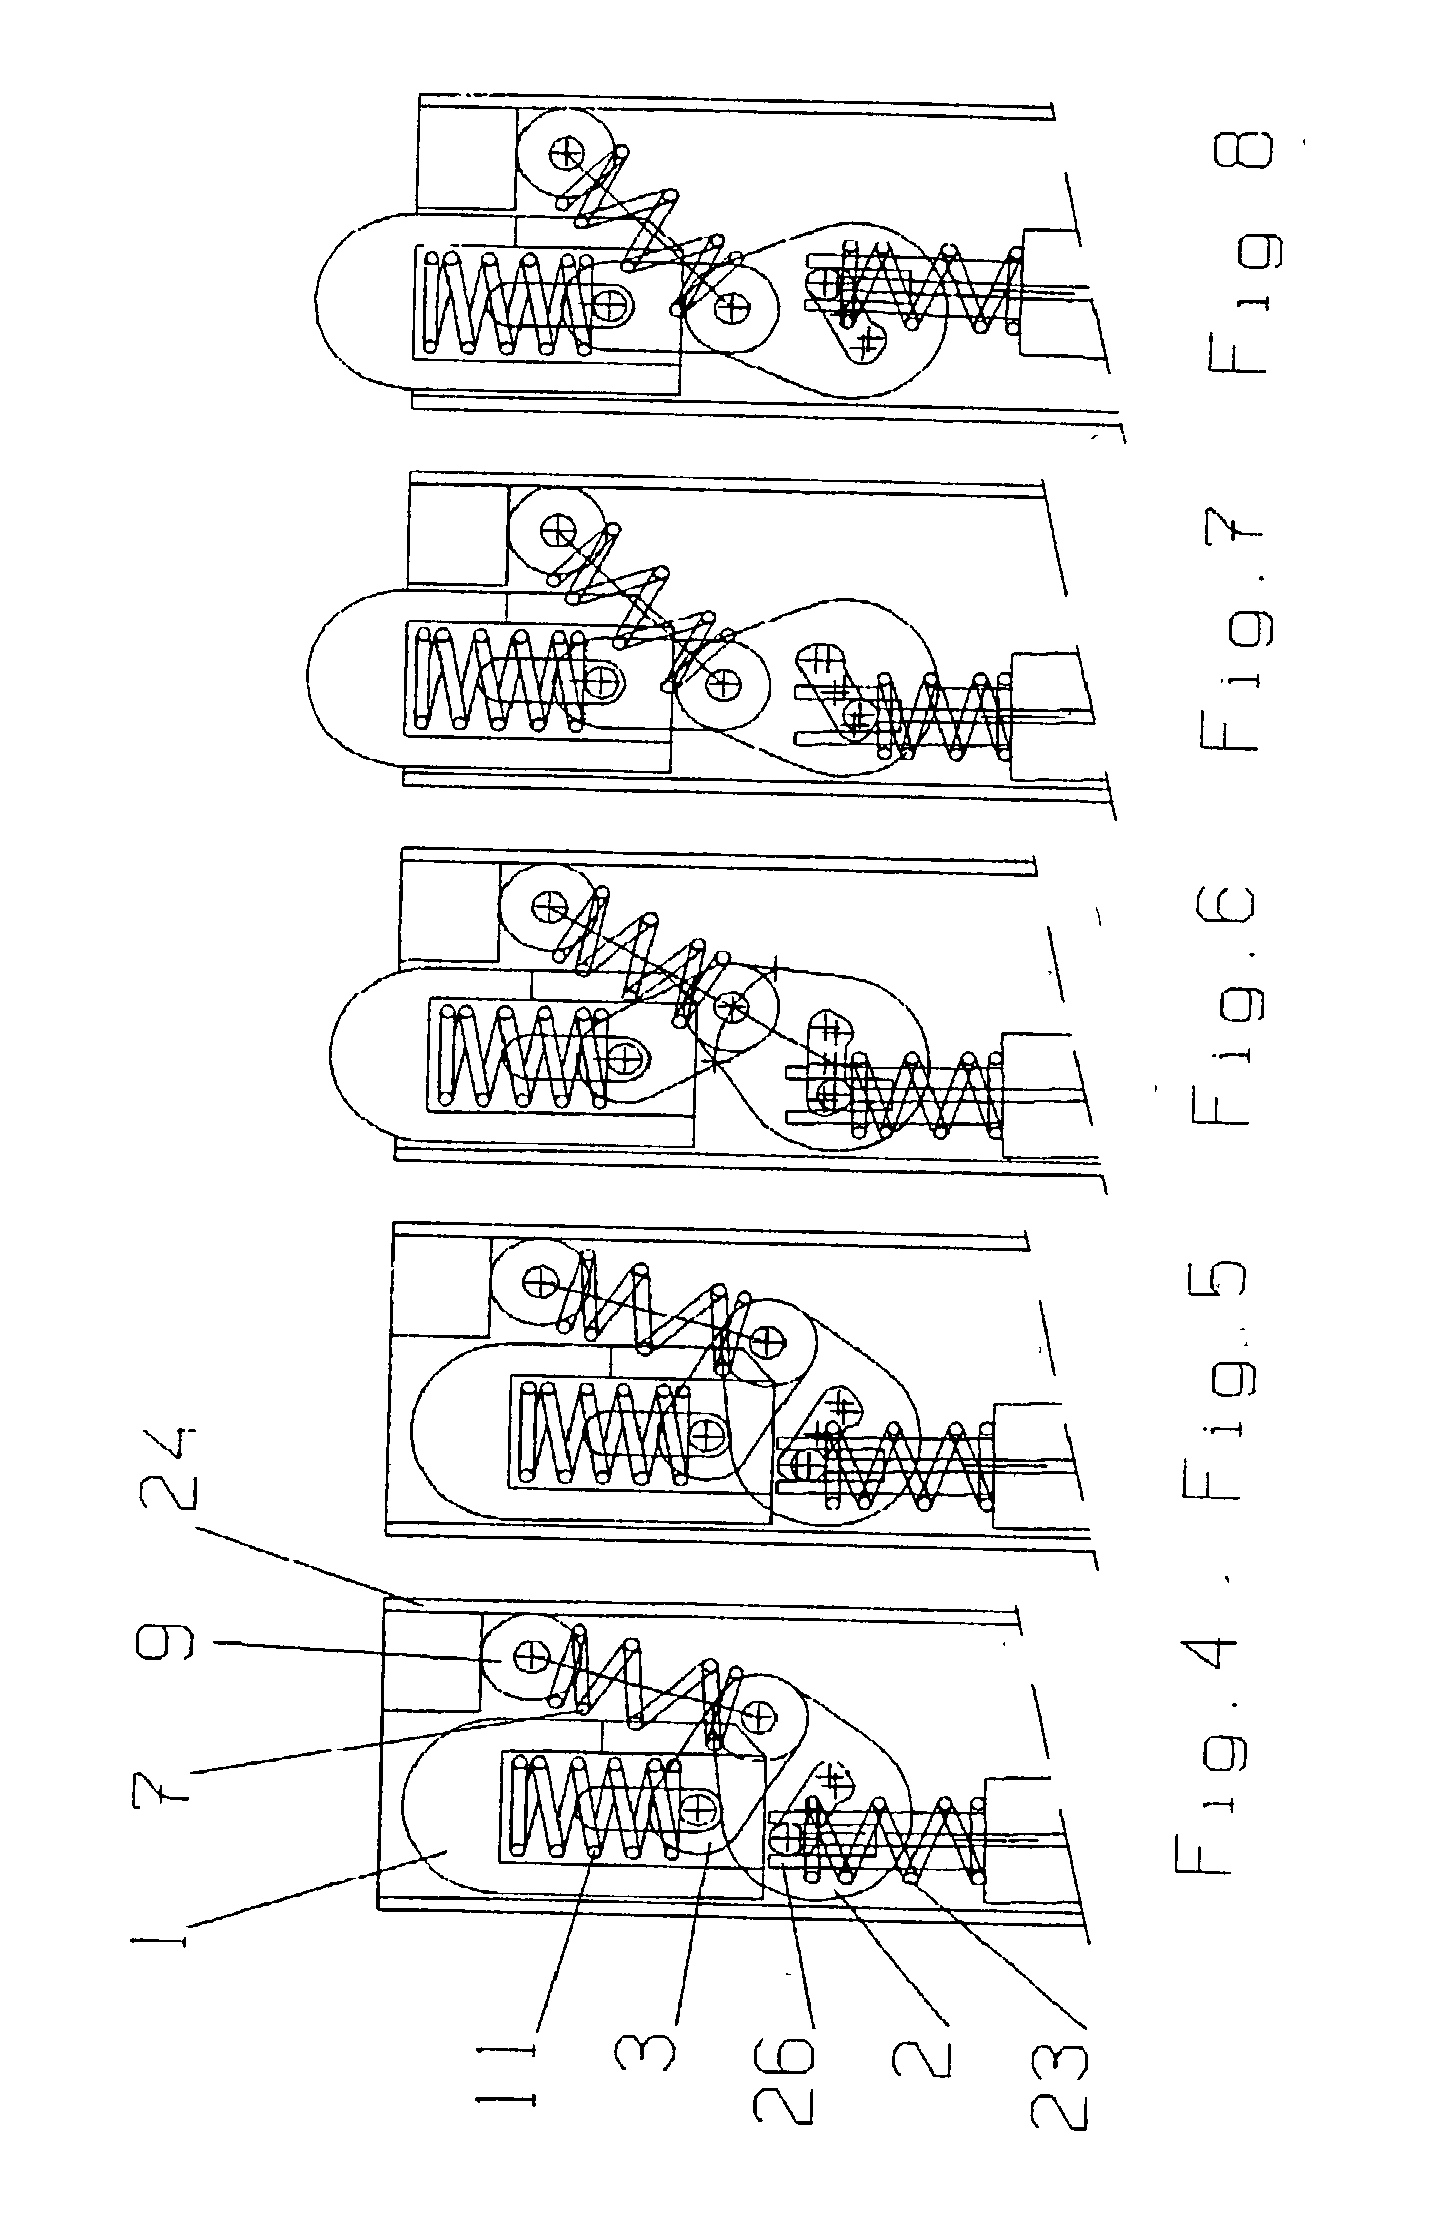 Single dot tactile reading module driven by a shape memory wire